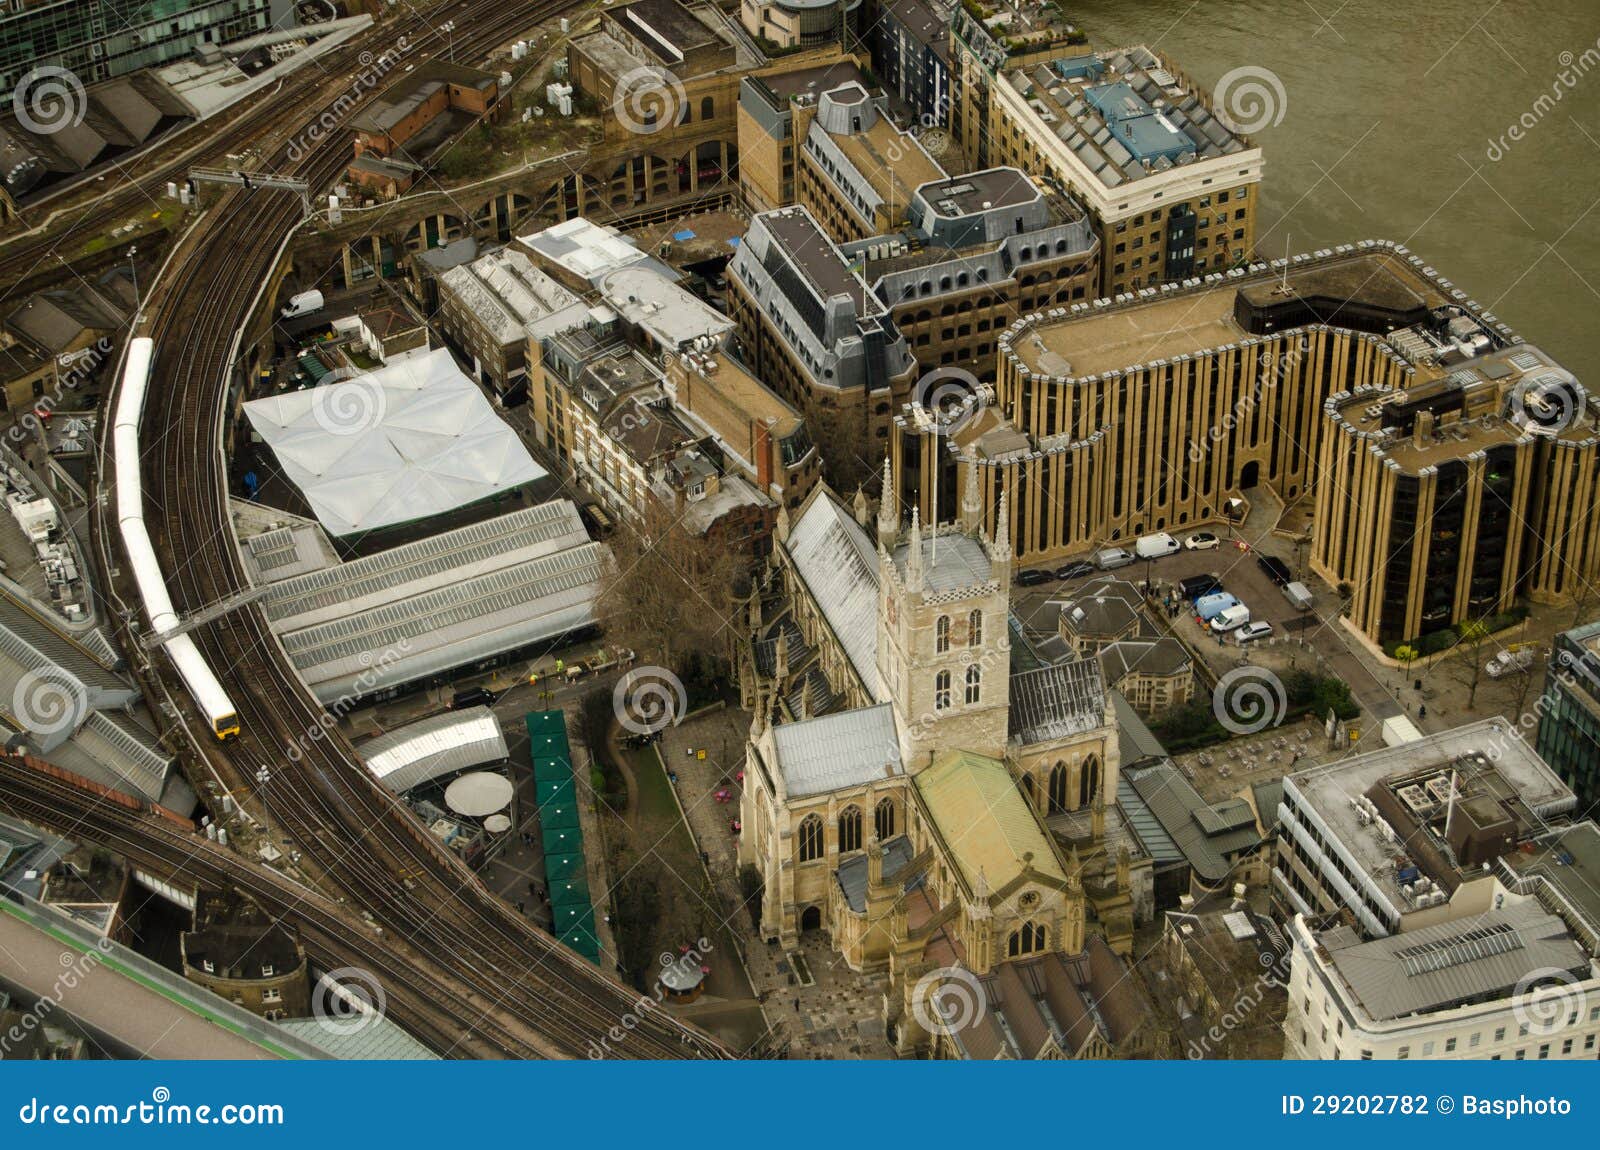 southwark cathedral from above